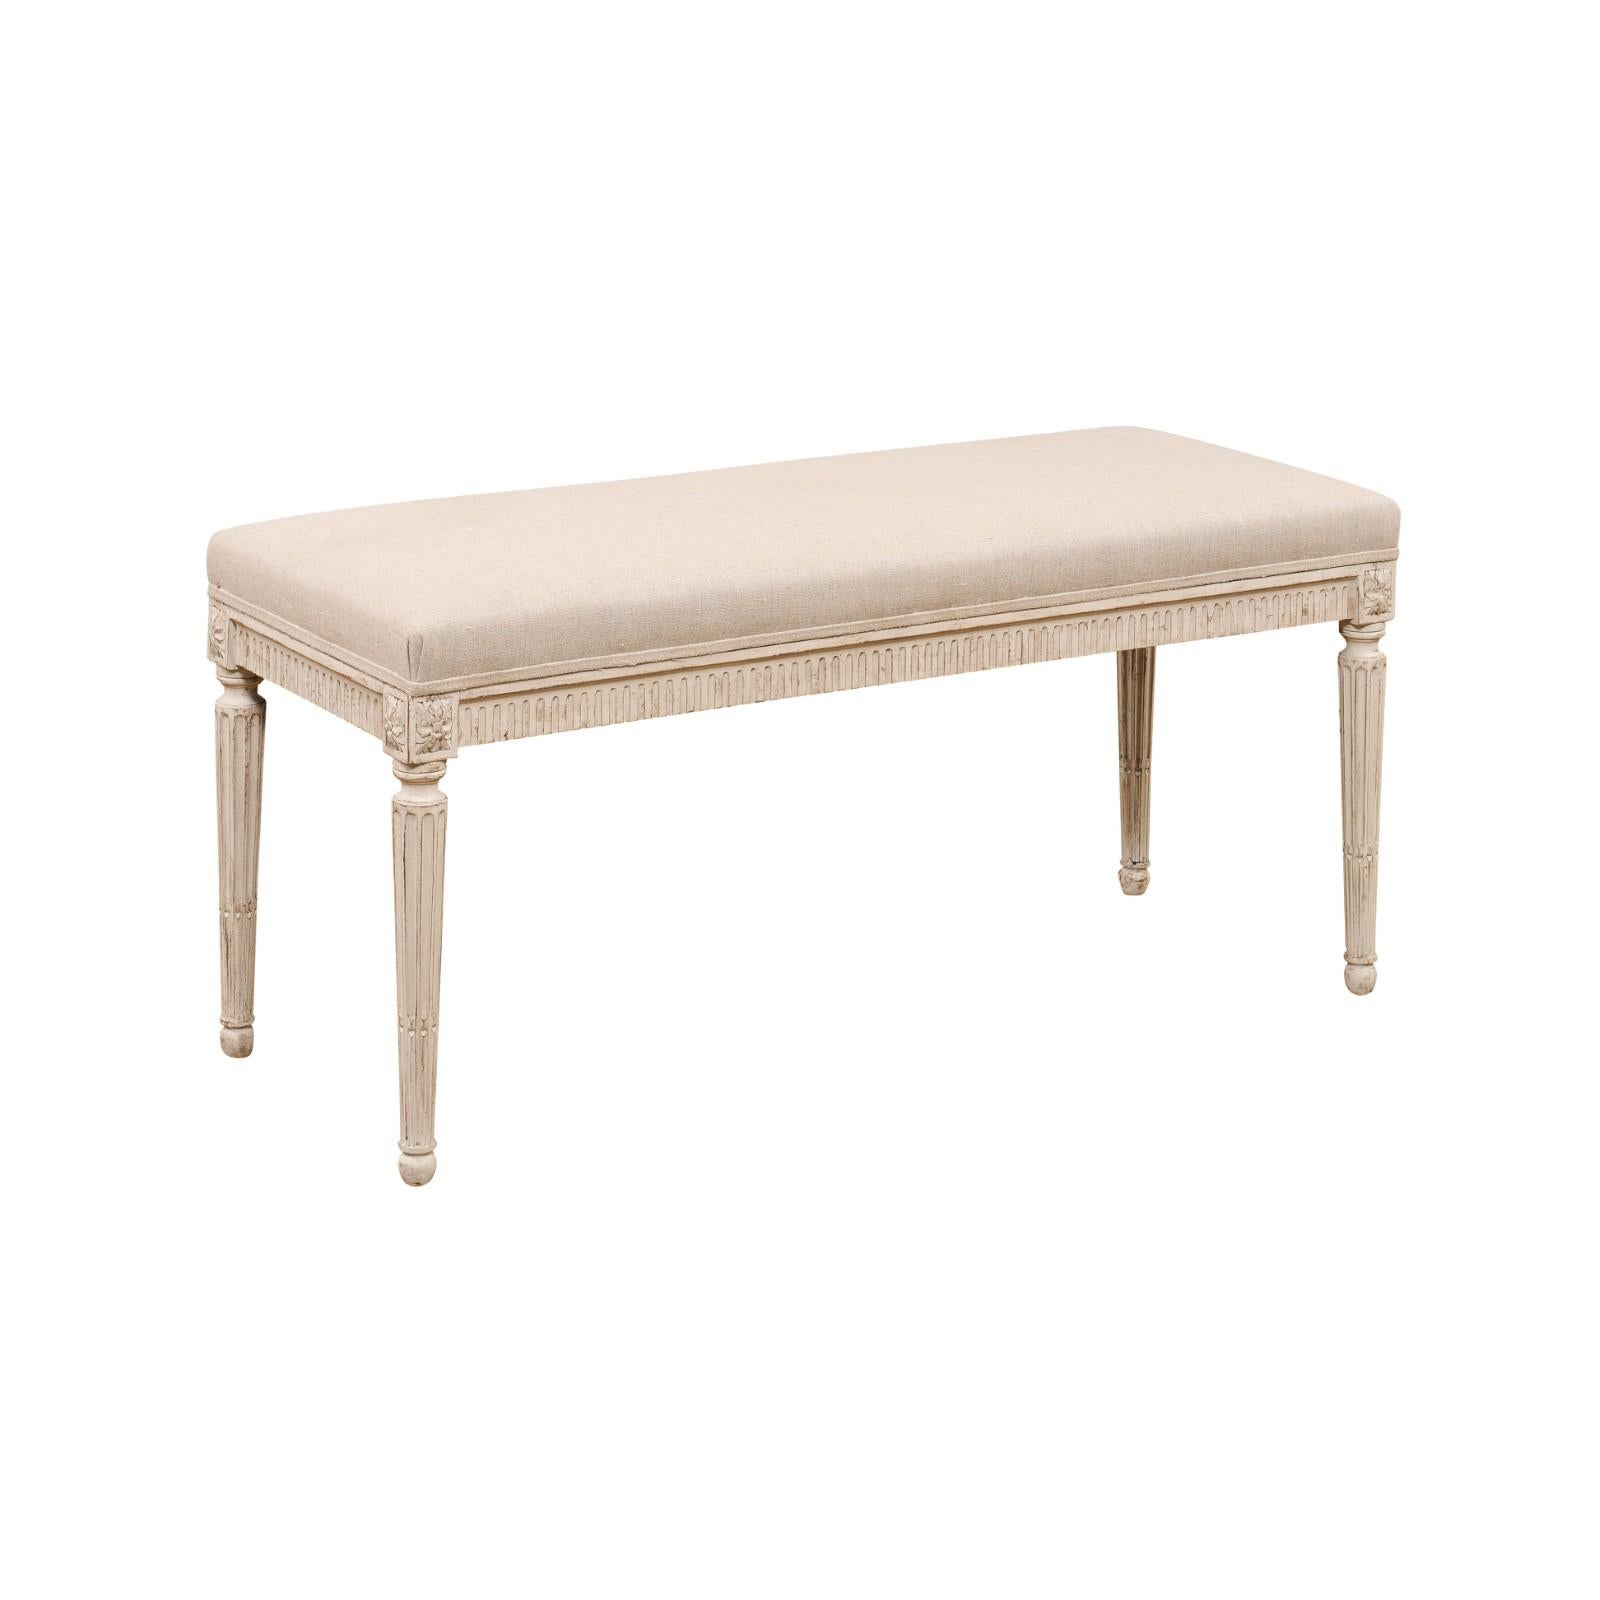 A Swedish Gustavian style painted wood bench from the late 19th century with lift-top, fluted apron, carved rosettes and cylindrical tapering legs. Created in Sweden during the last quarter of the 19th century, this painted bench features a